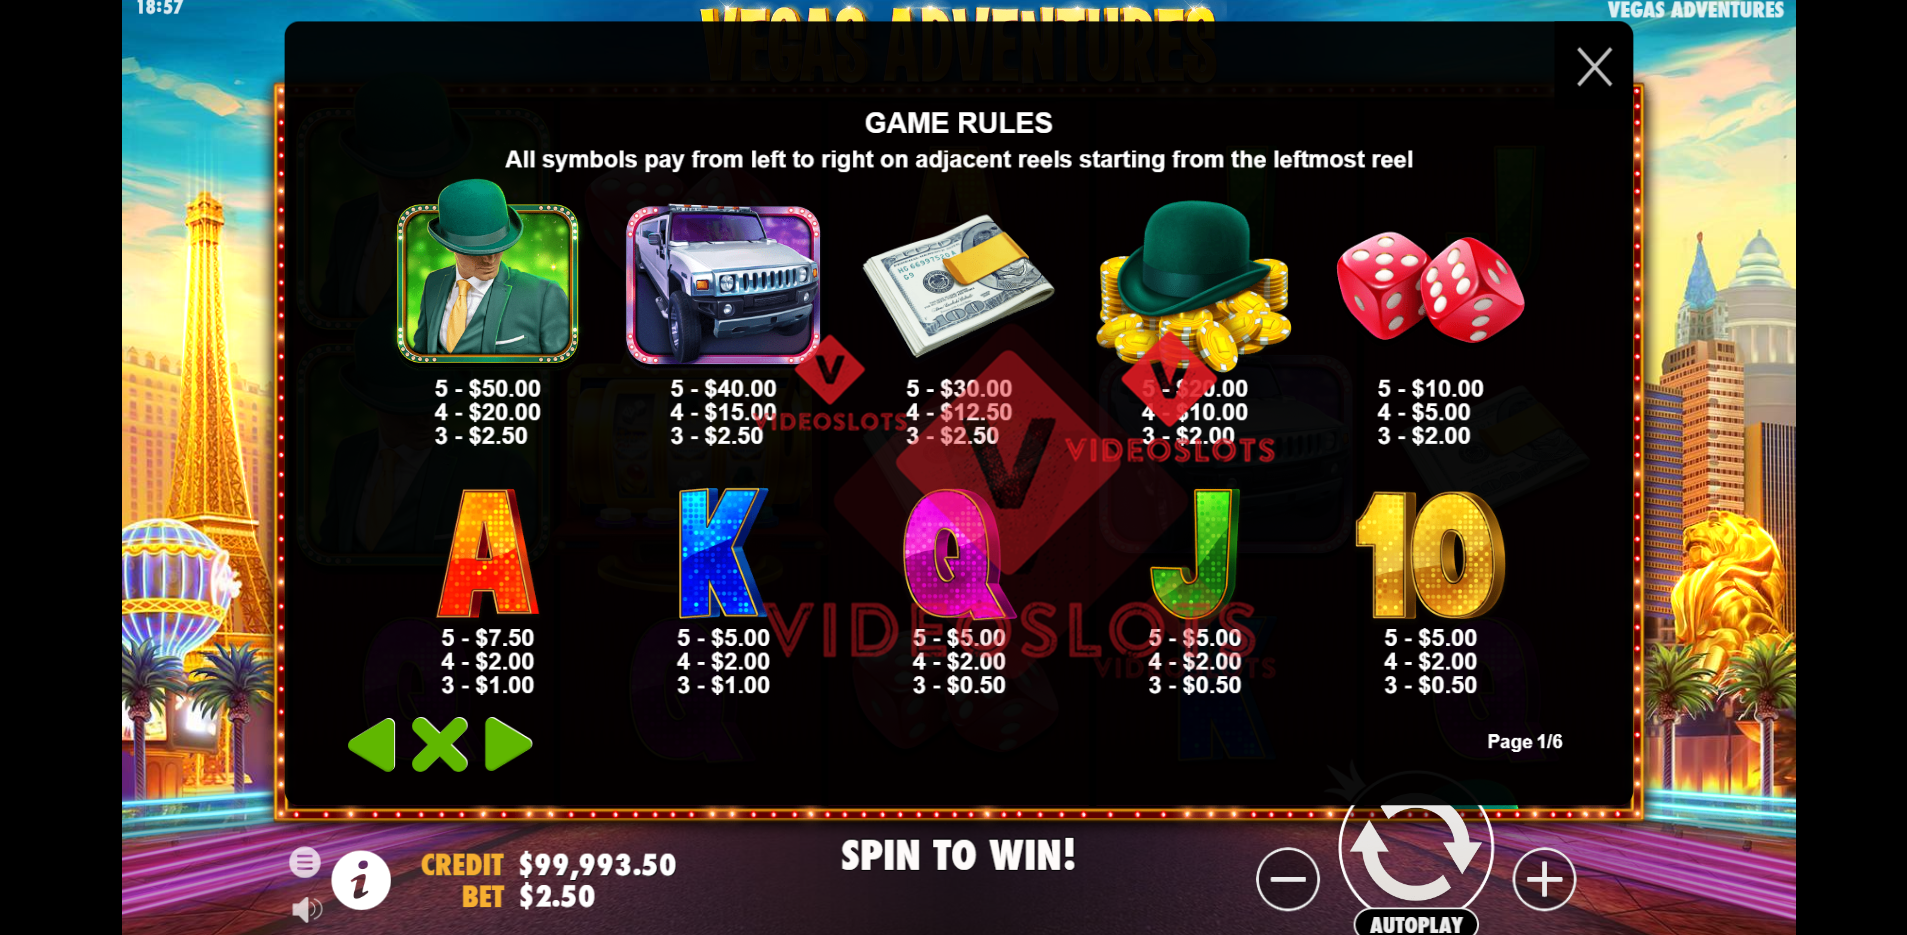 Pay Table for Vegas Adventures slot by Pragmatic Play